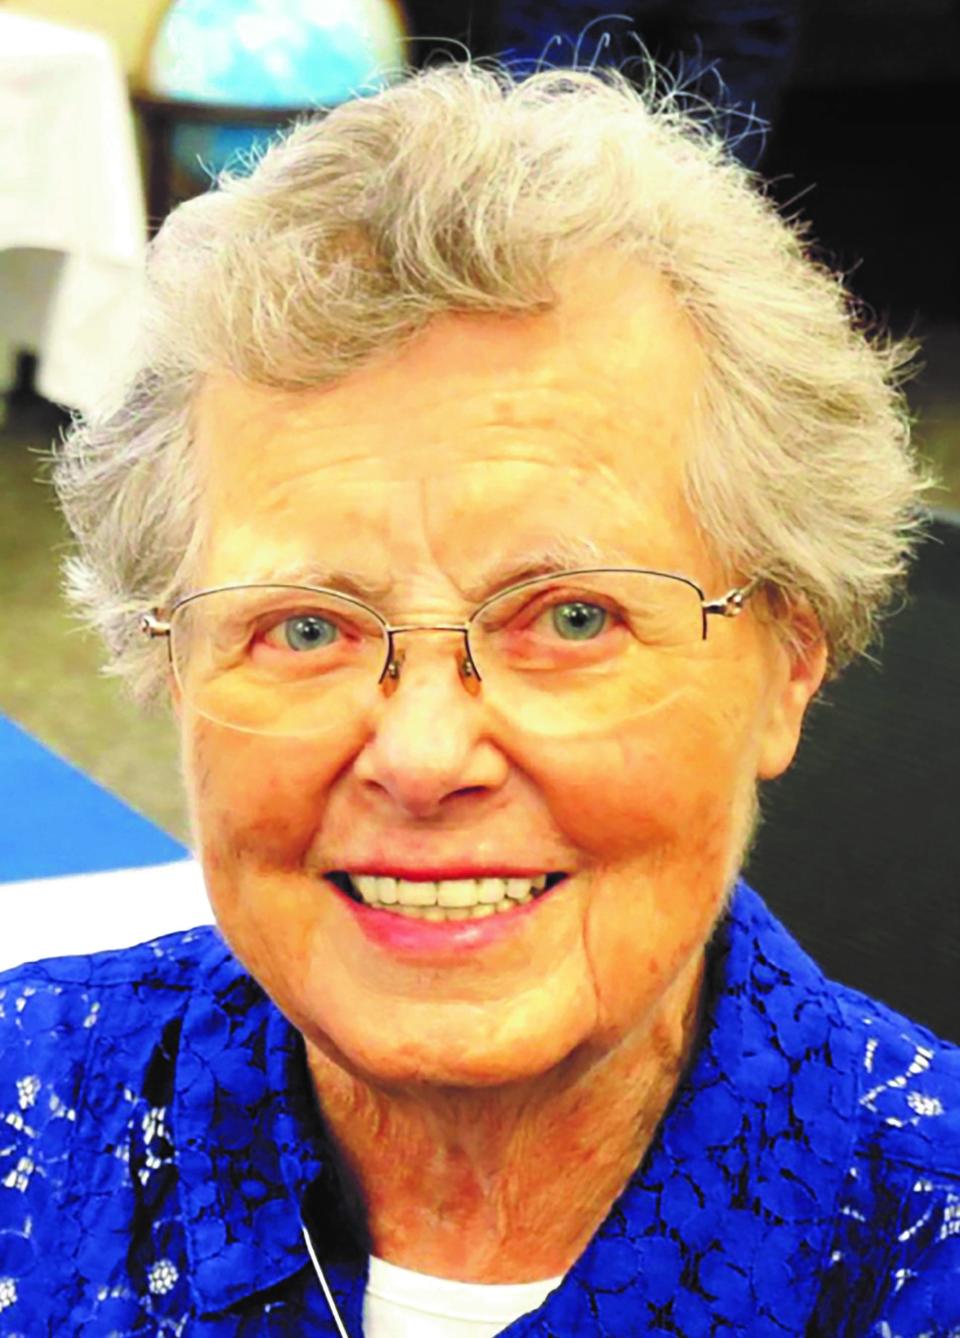 The estate of Gretchen Morgenstern gifted $700,000 to Kansas Wesleyan University. Morgenstern, who passed away in 2022, was a former member of the board of trustees for the university.